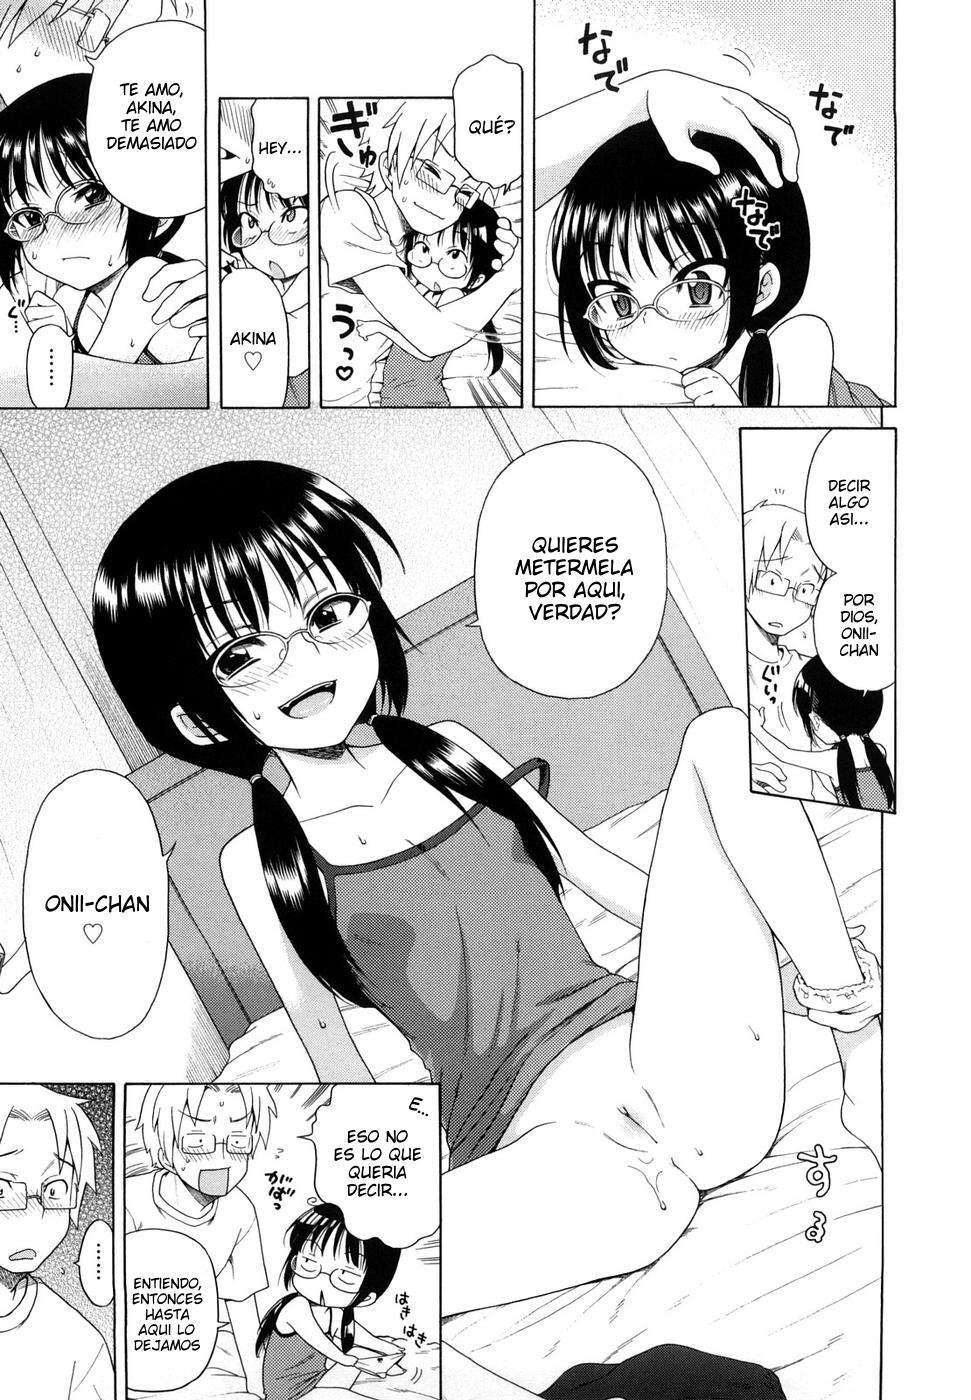 Me gustas Onii-chan! Chapter-10 - 15